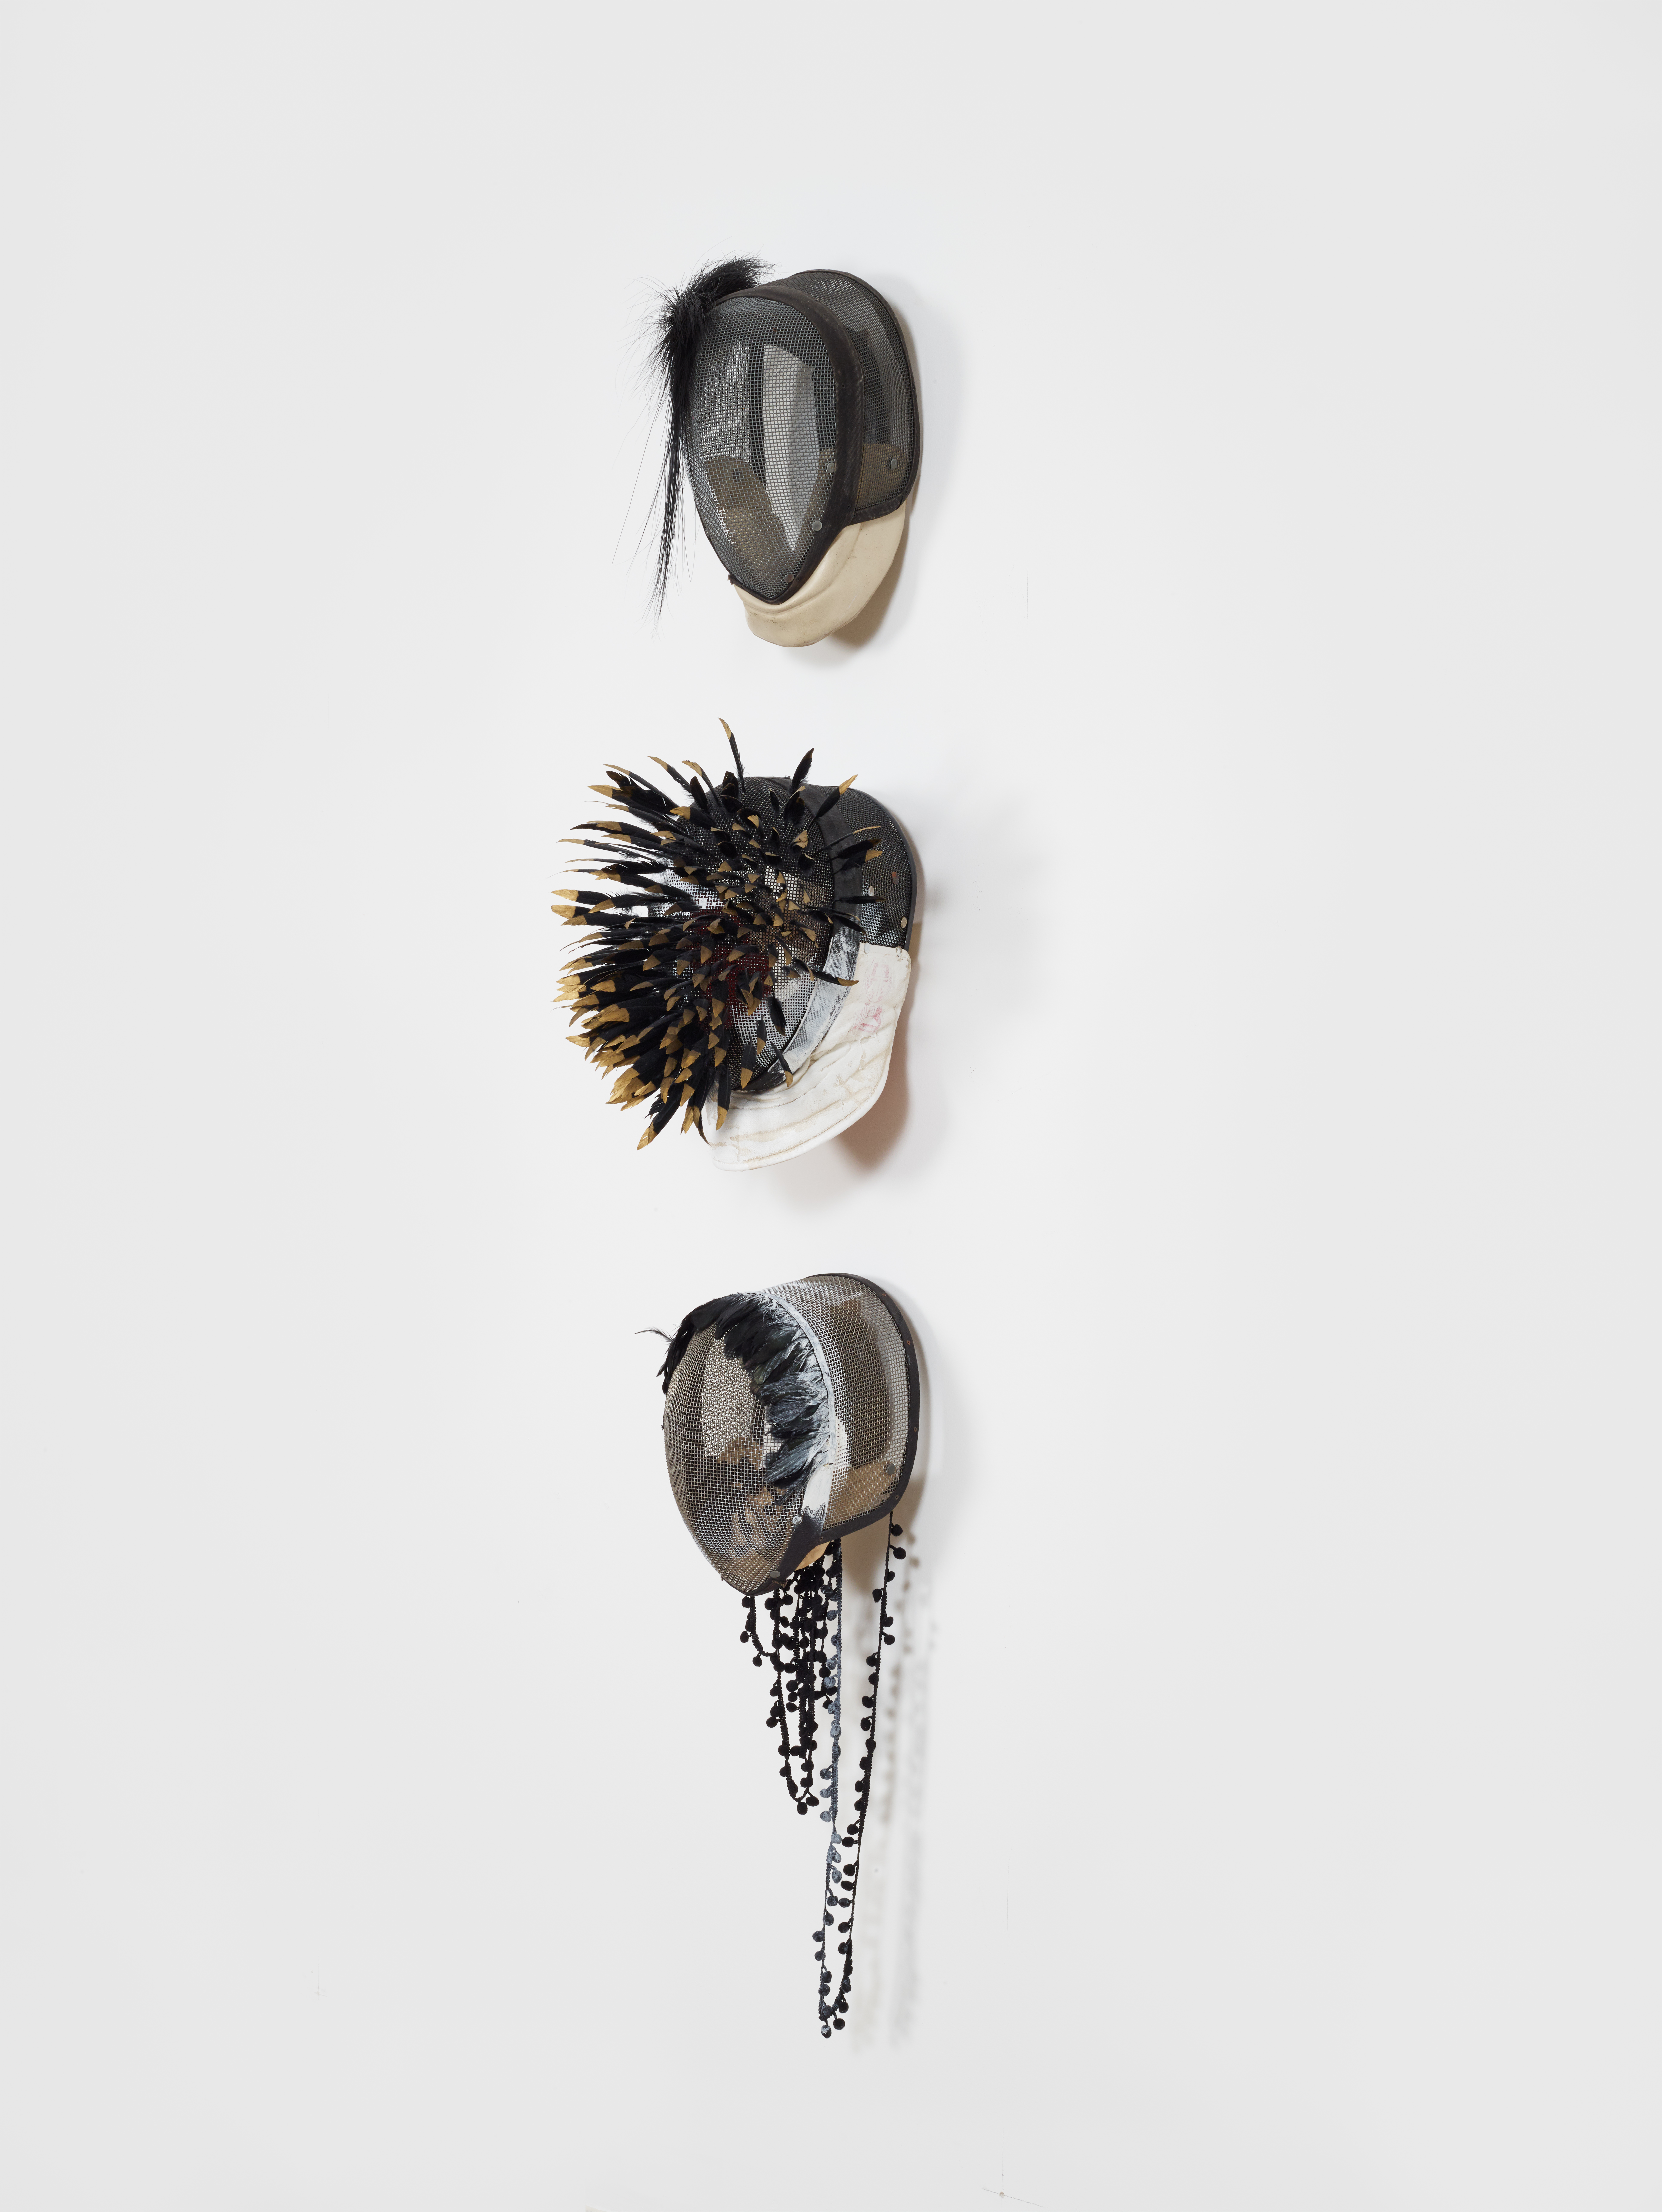  Allison Janae Hamilton 
Untitled (Three Fencing Masks), 2017
Found vintage fencing masks, painted feathers, horsehair, velvet, cotton trimming, and acrylic paint
64 × 13 × 14 in.